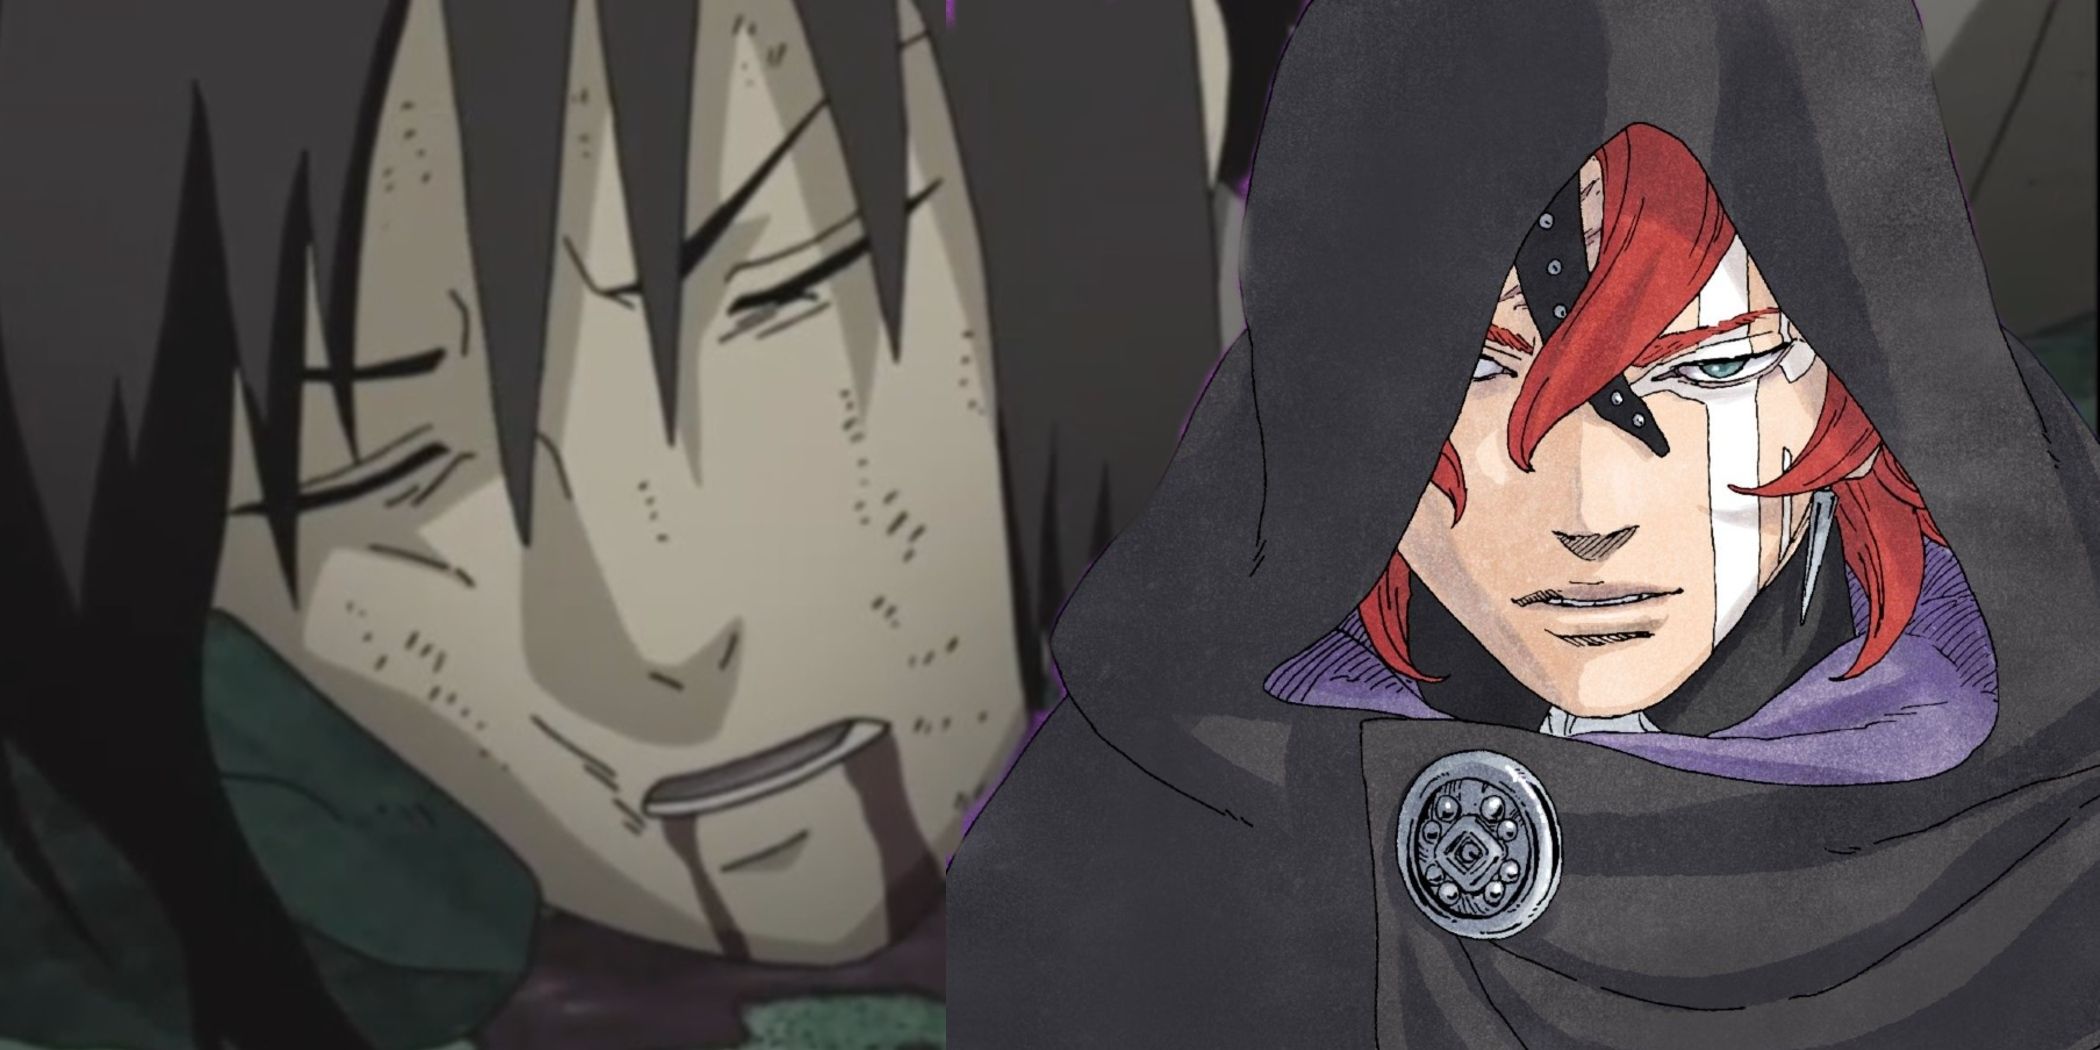 Boruto manga hints the death of another Naruto character; Here's what we  know